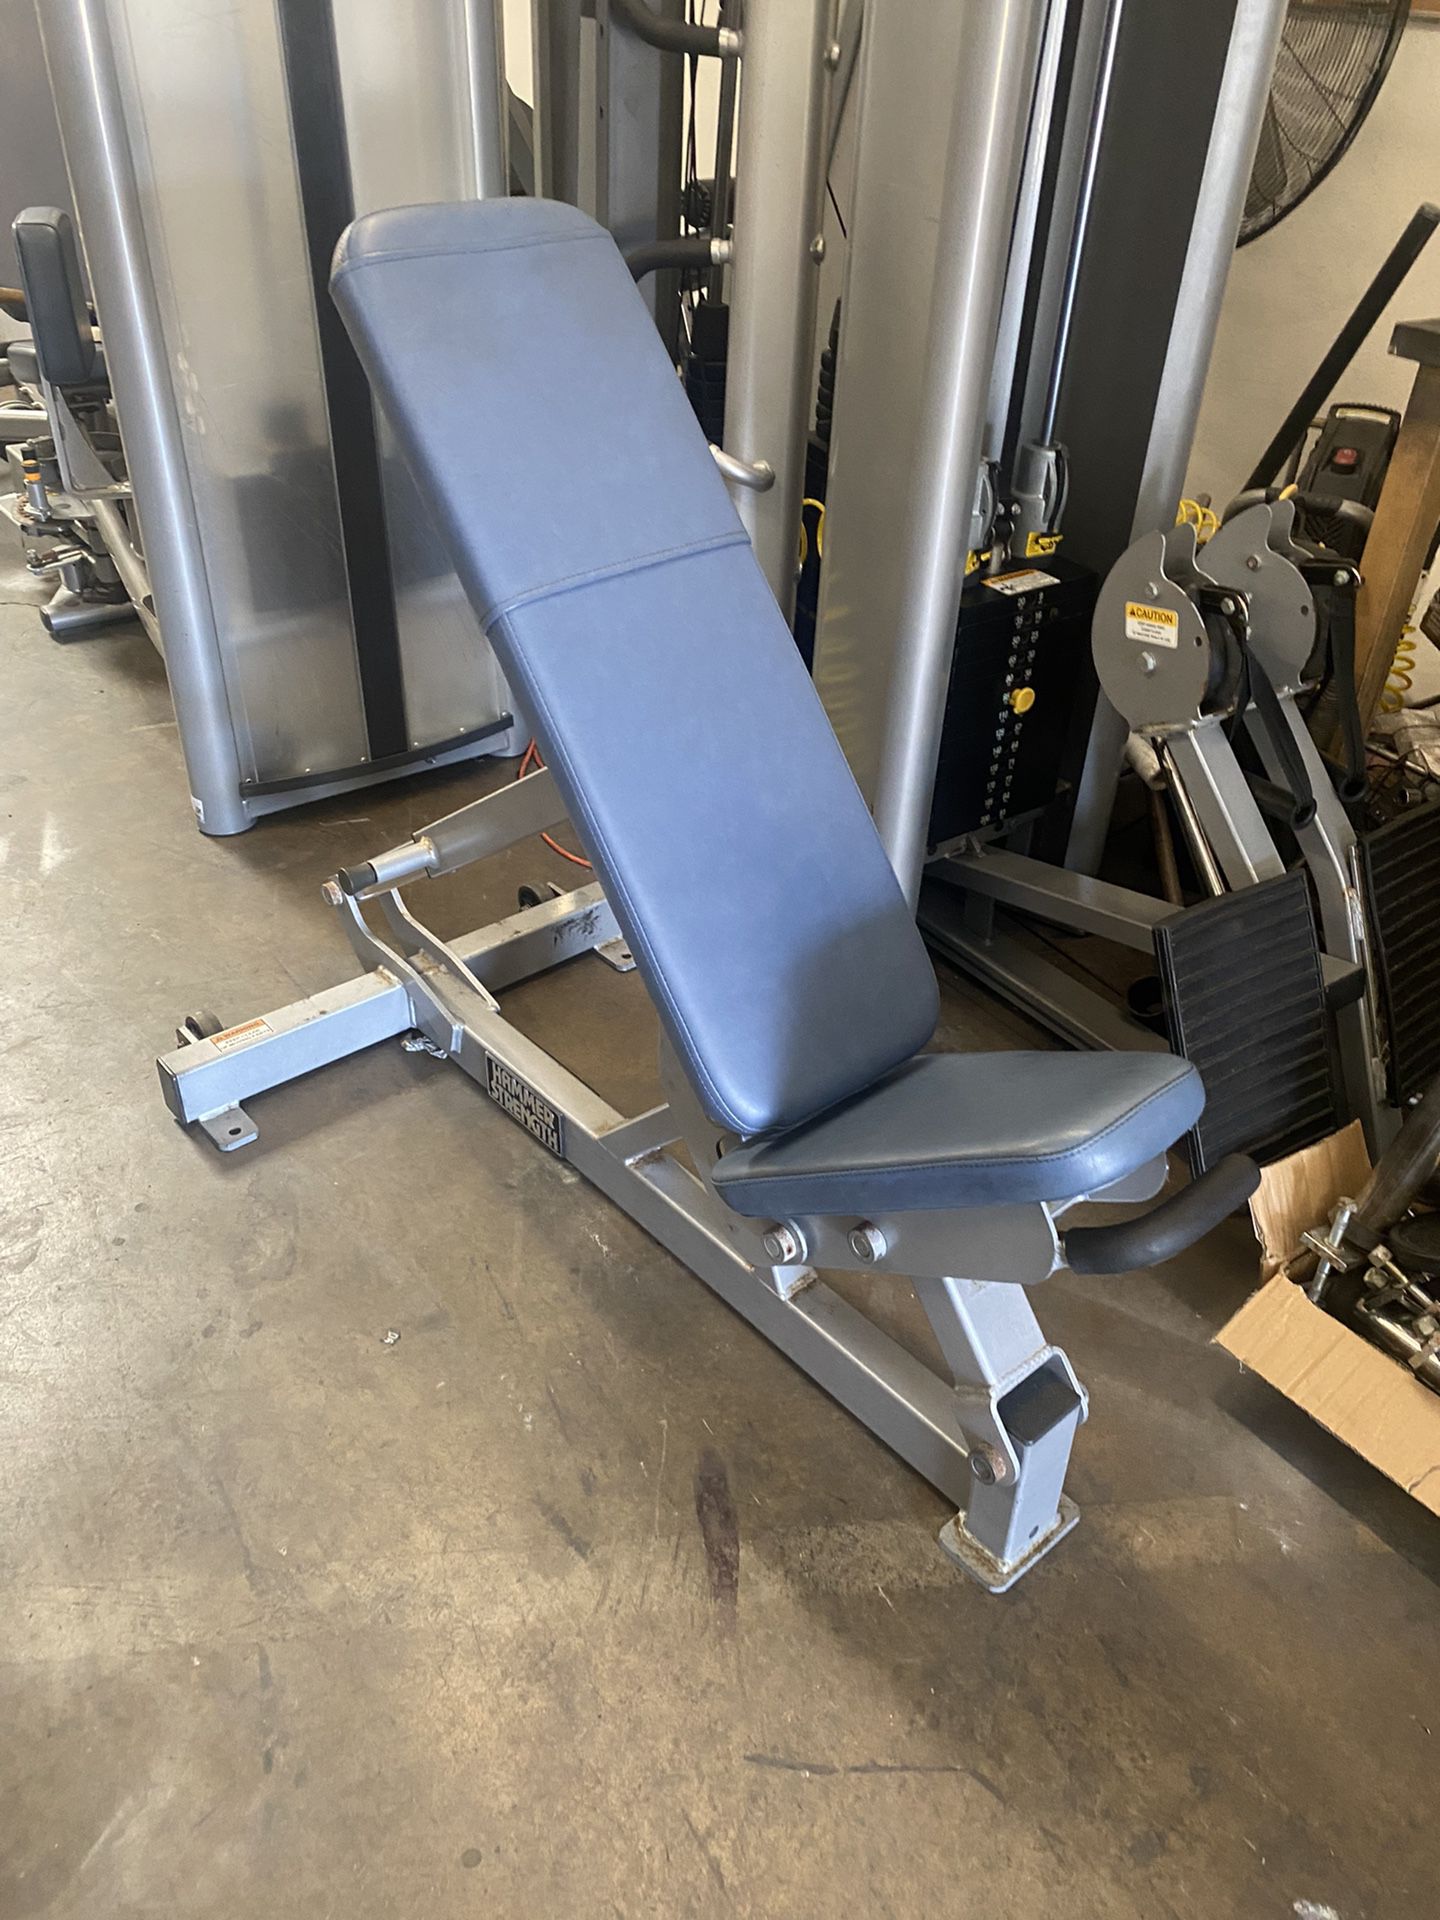 Hammer Strength Weight Bench, Commercial Gym Equipment for Sale in Santa Ana, CA - OfferUp